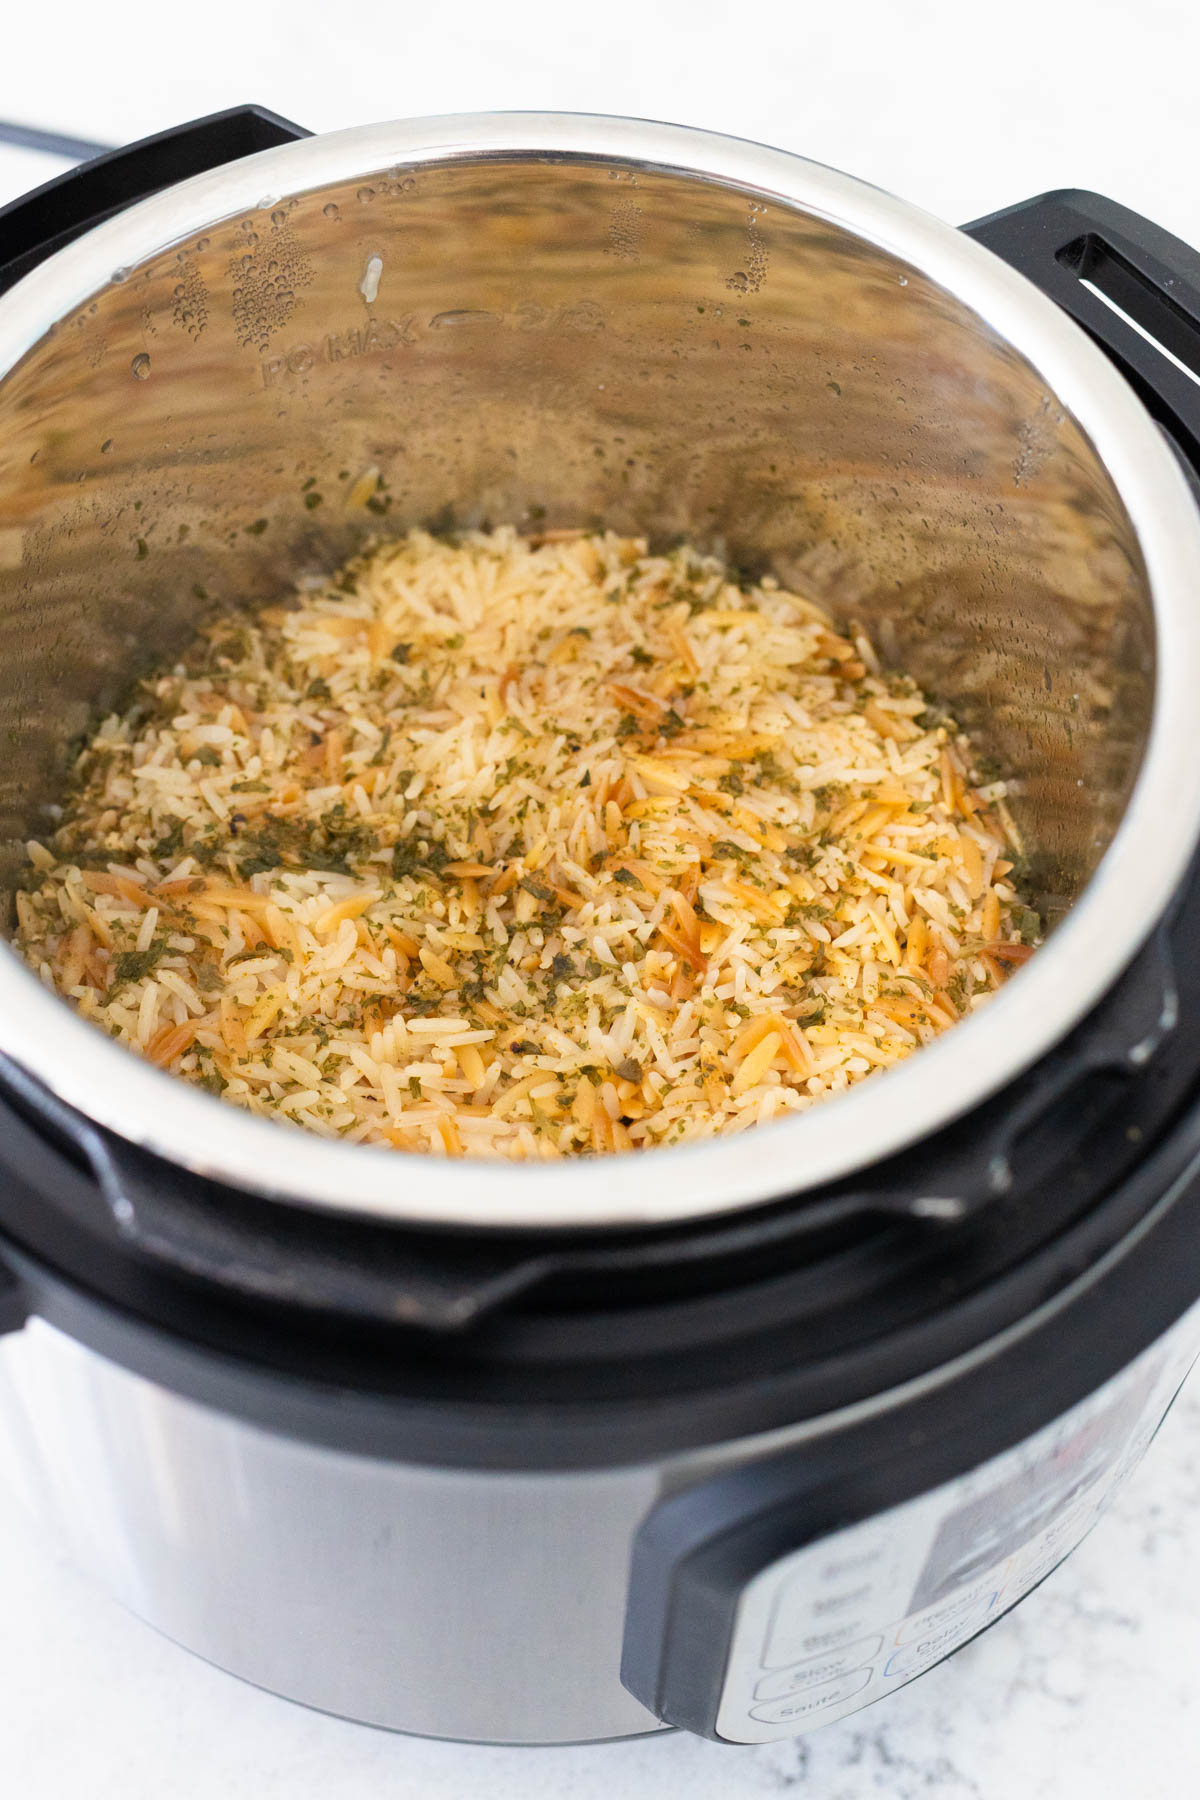 The rice pilaf has finished cooking in the Instant Pot and has more than doubled in size.